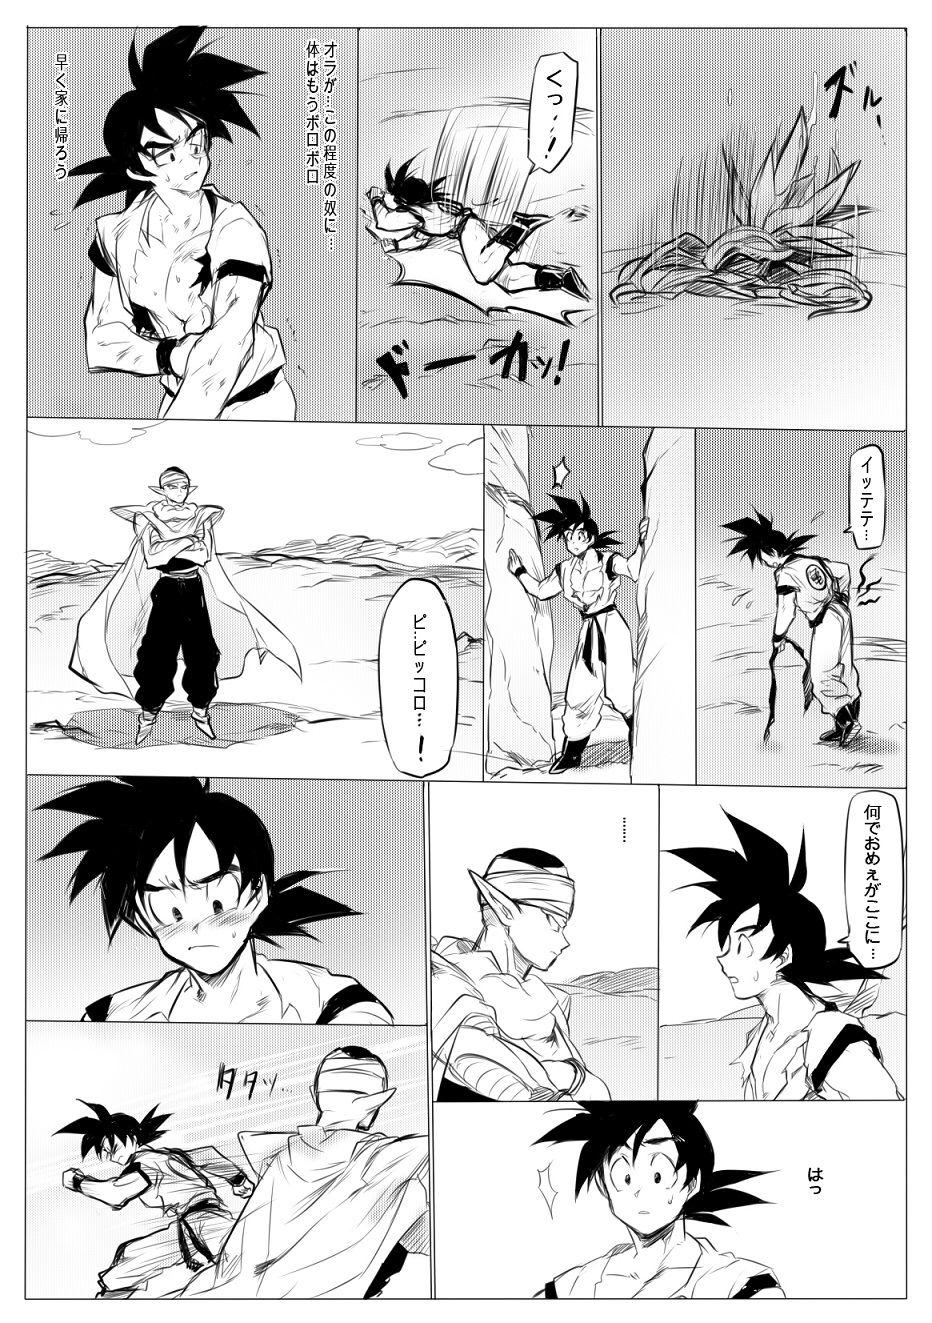 One 接触 - Dragon ball z Shemales - Page 28